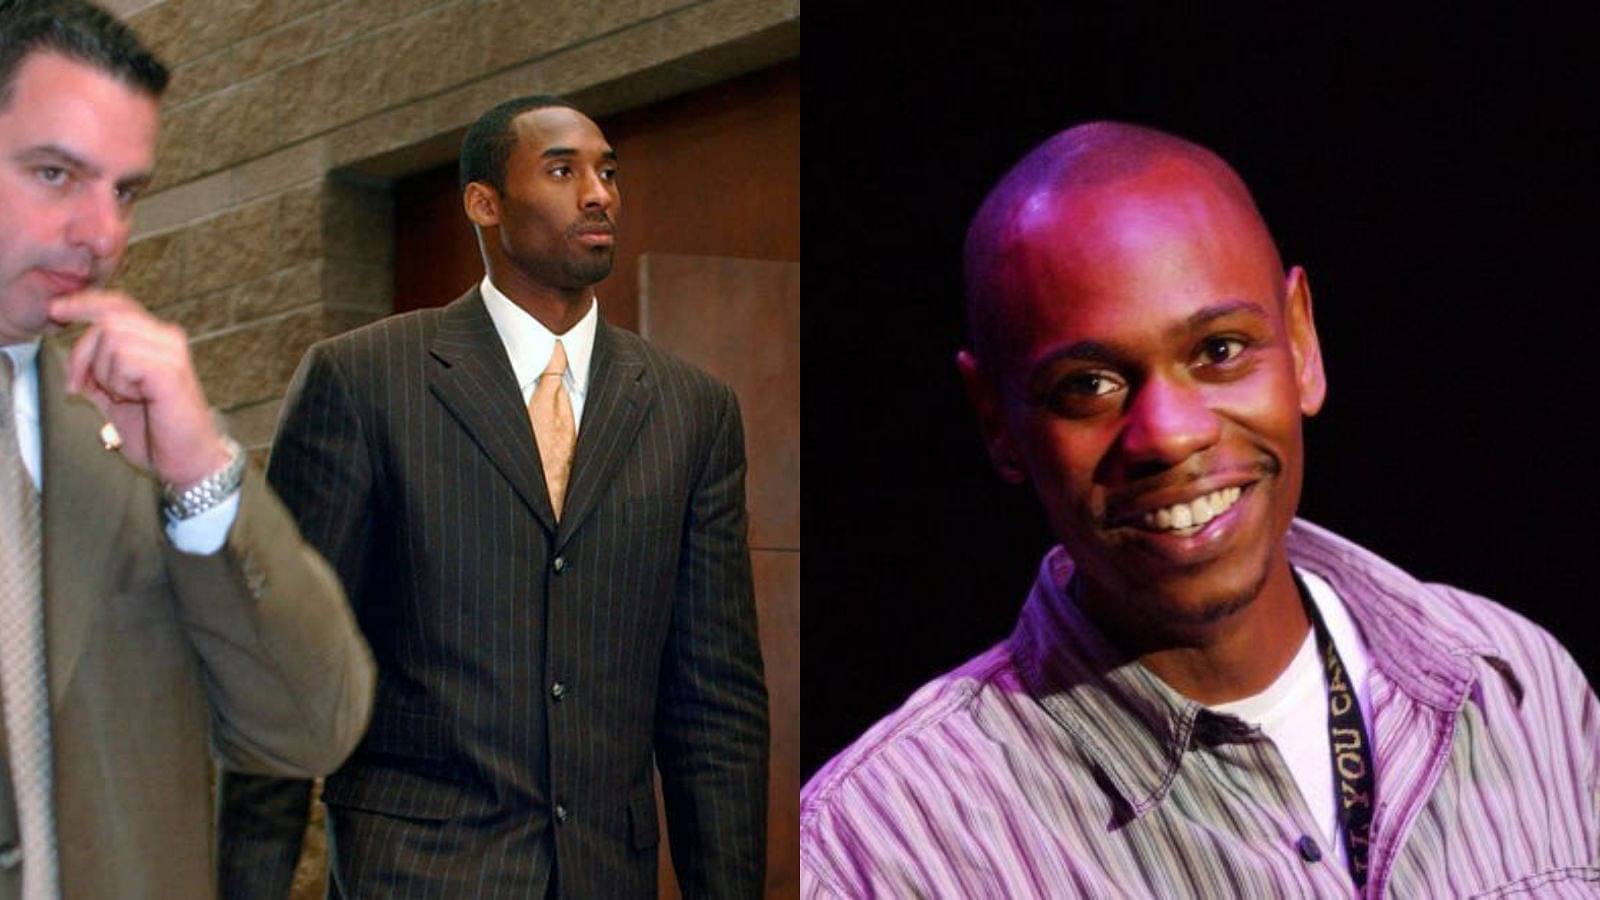 “Kobe Bryant played ball like he was trying to beat those assault charges on court”: When the comedy genius who rejected Comedy Central's $50 million came up with one of his best bits